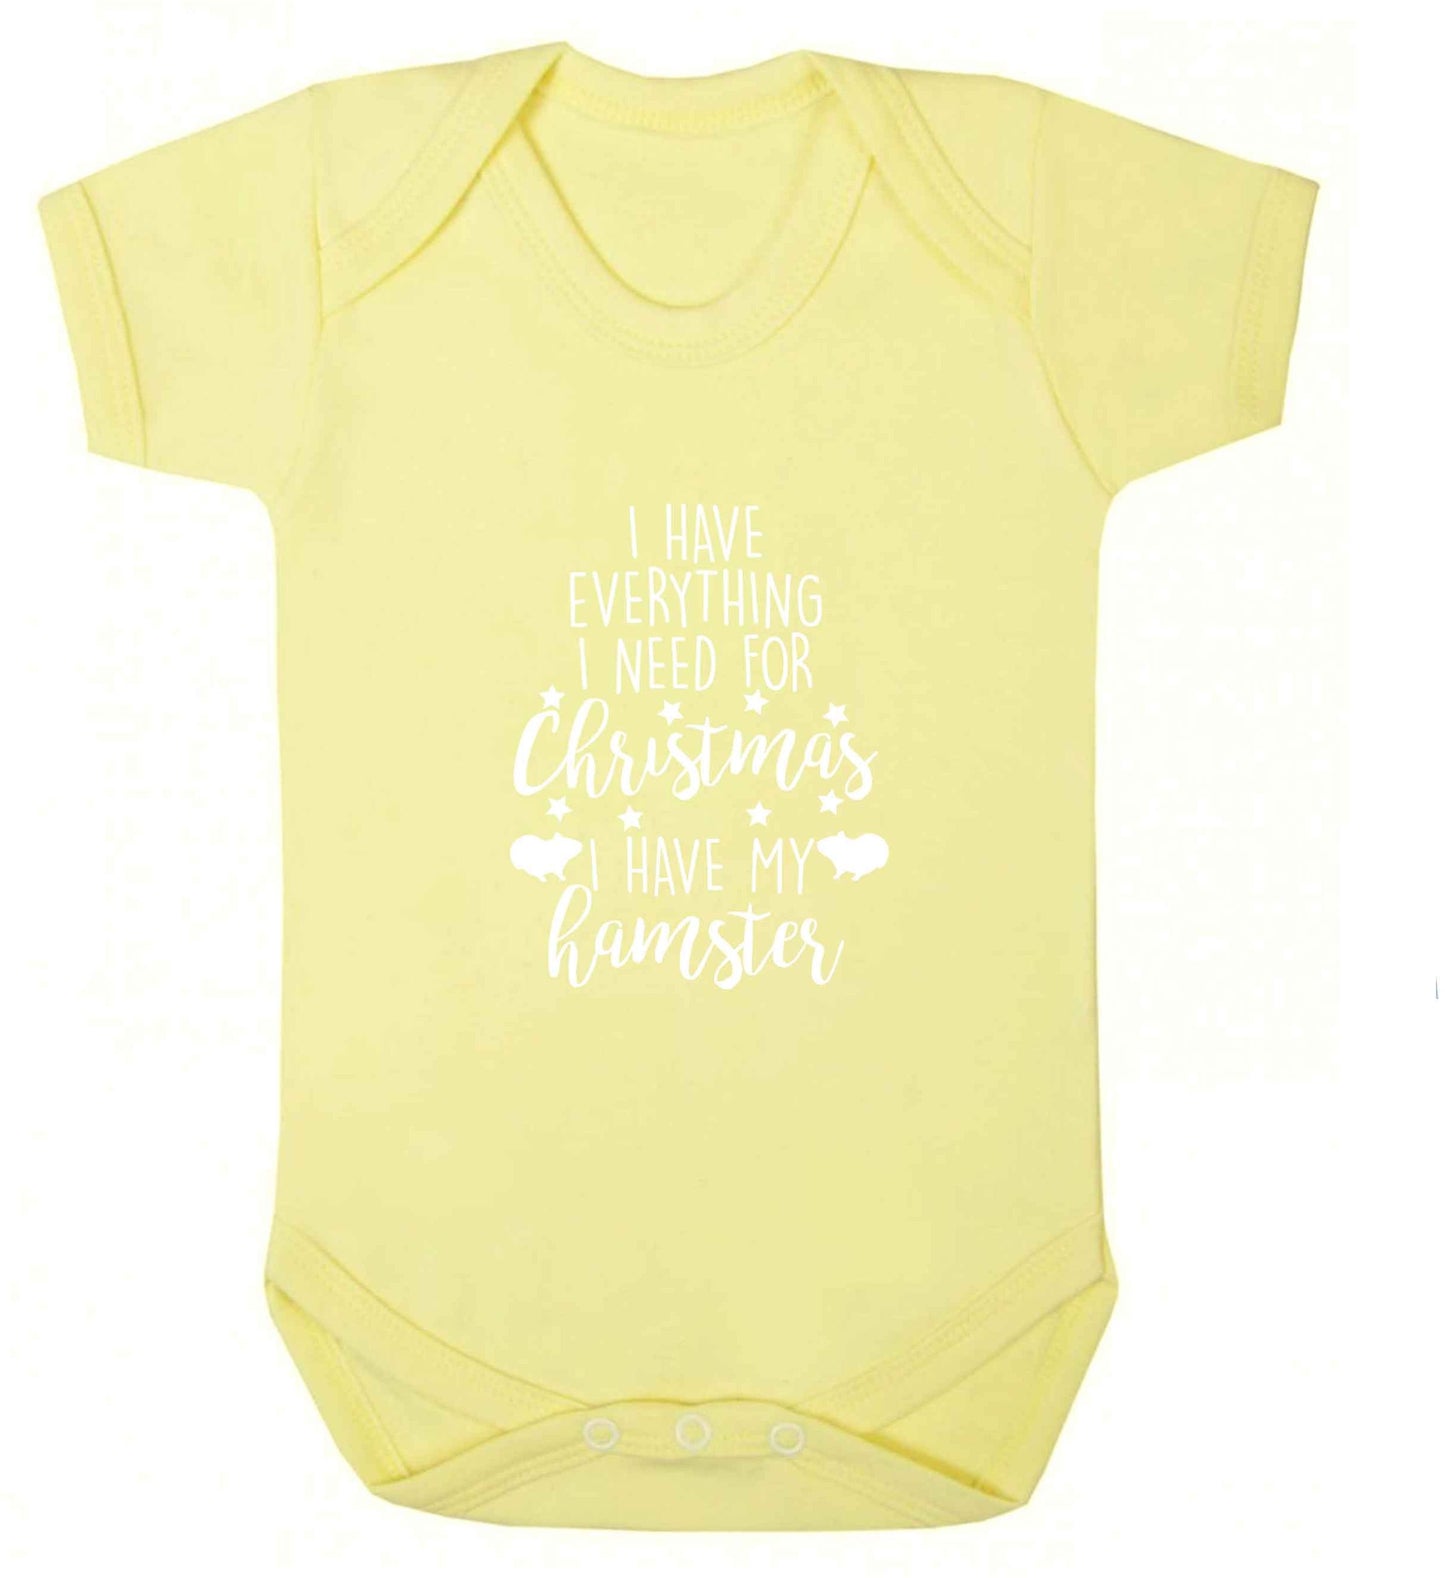 I have everything I need for Christmas I have my hamster baby vest pale yellow 18-24 months